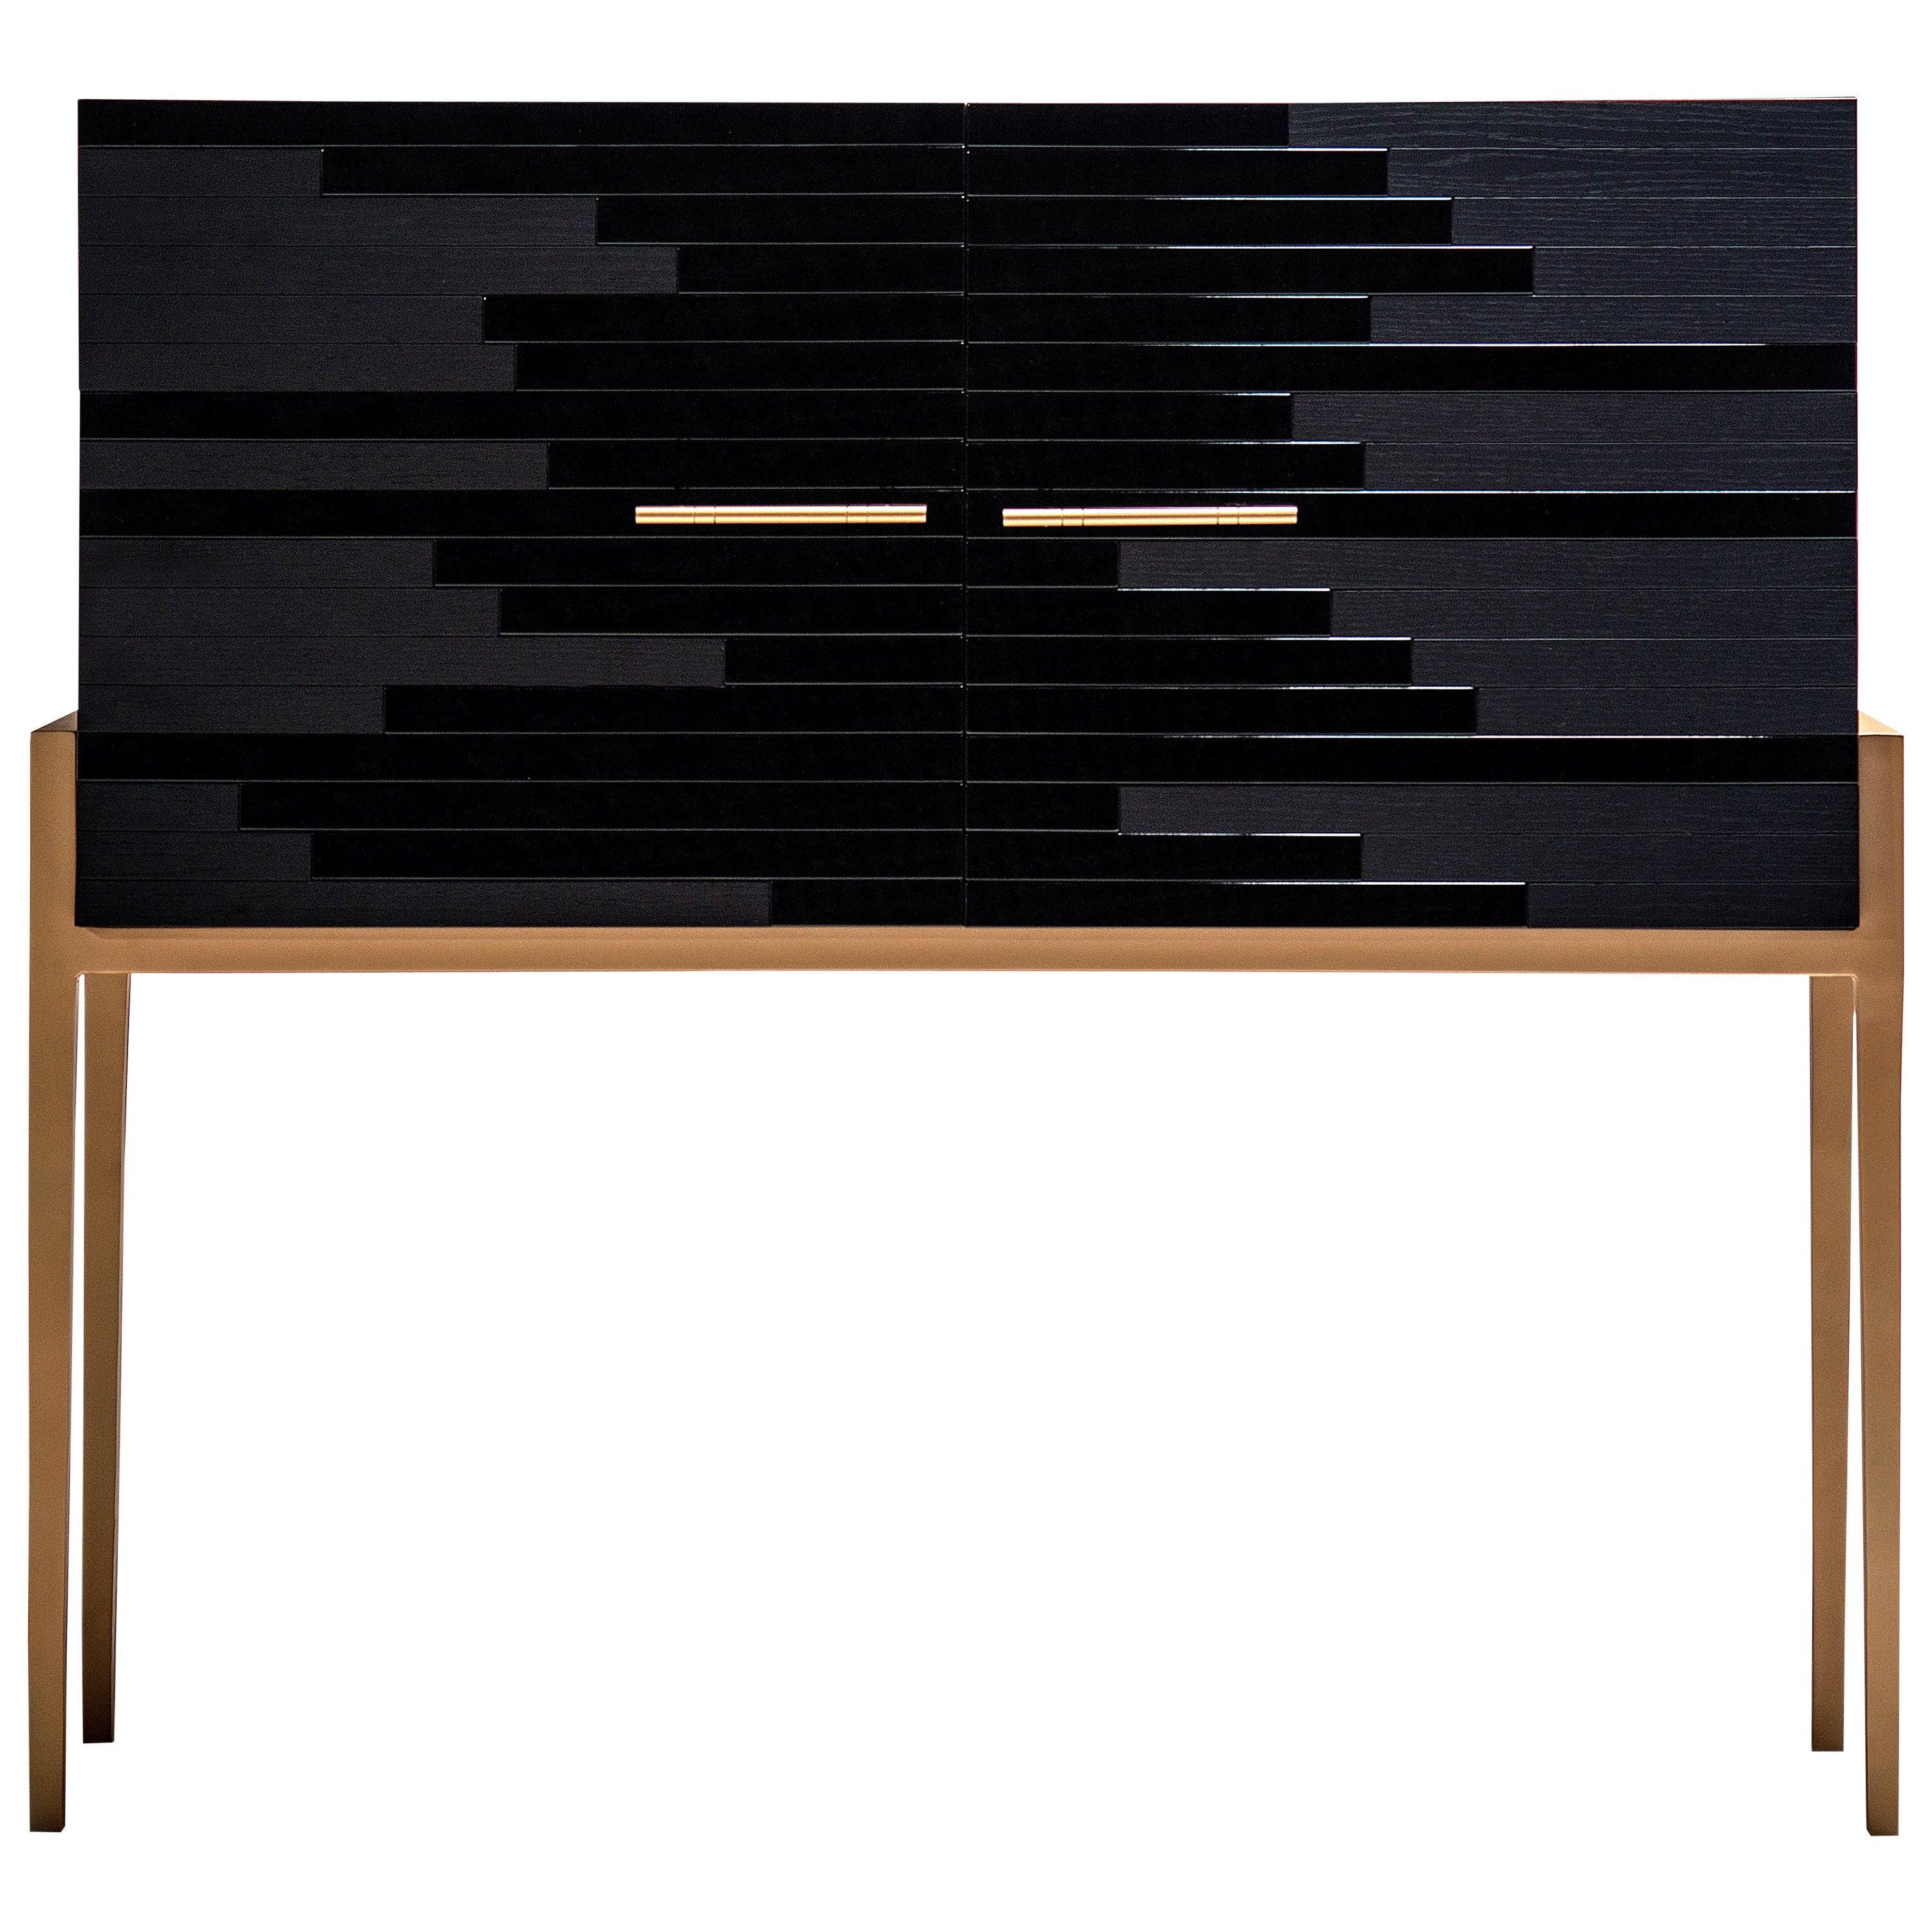 Vind is one of our 'social media hit' high-end furniture designs. Having had such a positive feedback on social media so soon, this cabinet manages to make its presence known even though its design features are both elegant and composed. Its modern